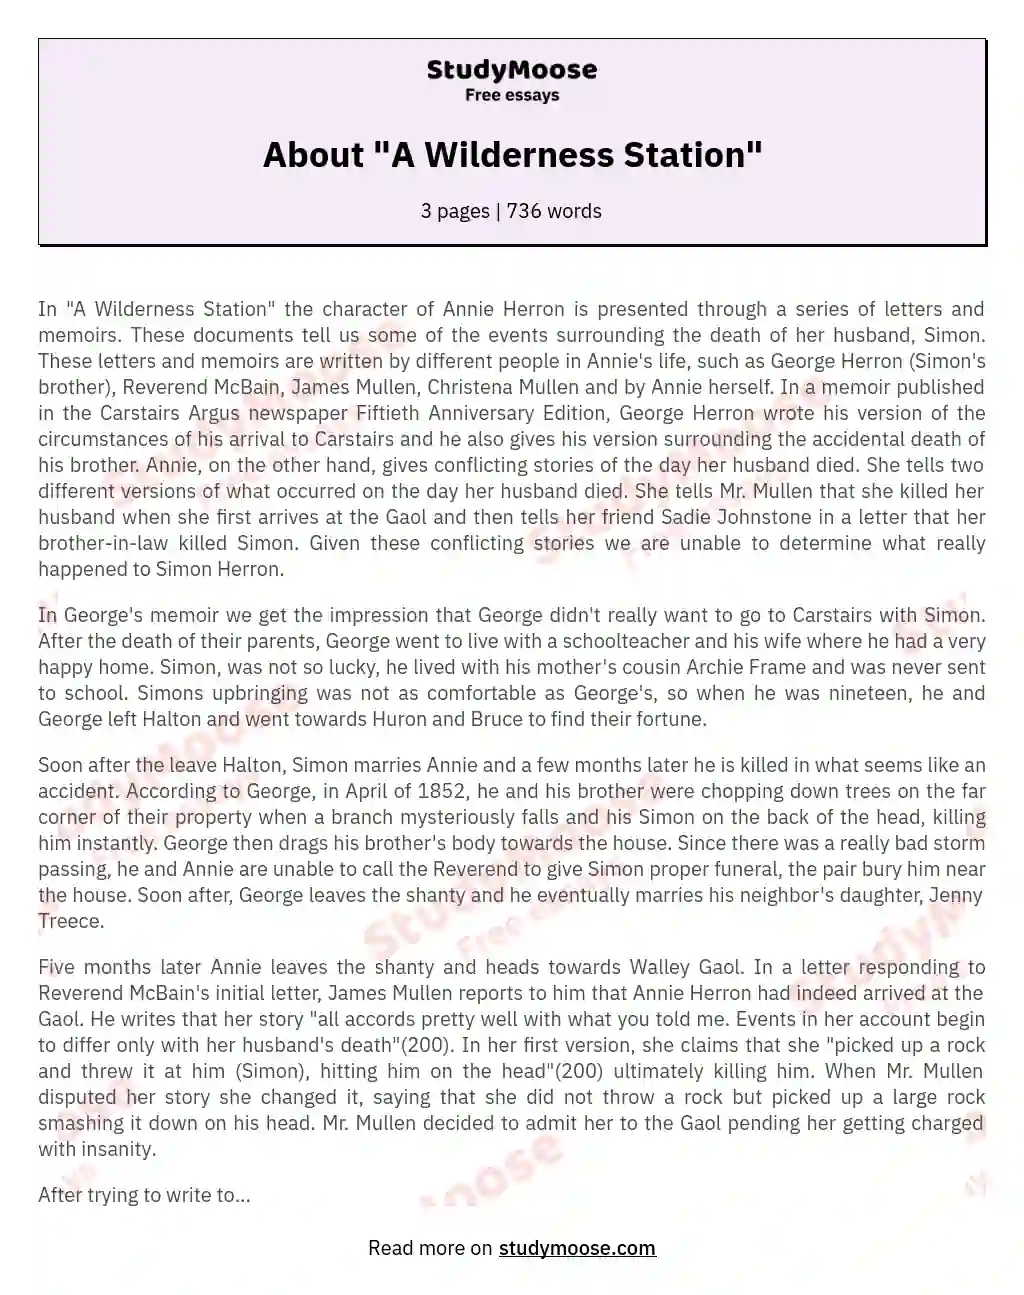 About "A Wilderness Station" essay